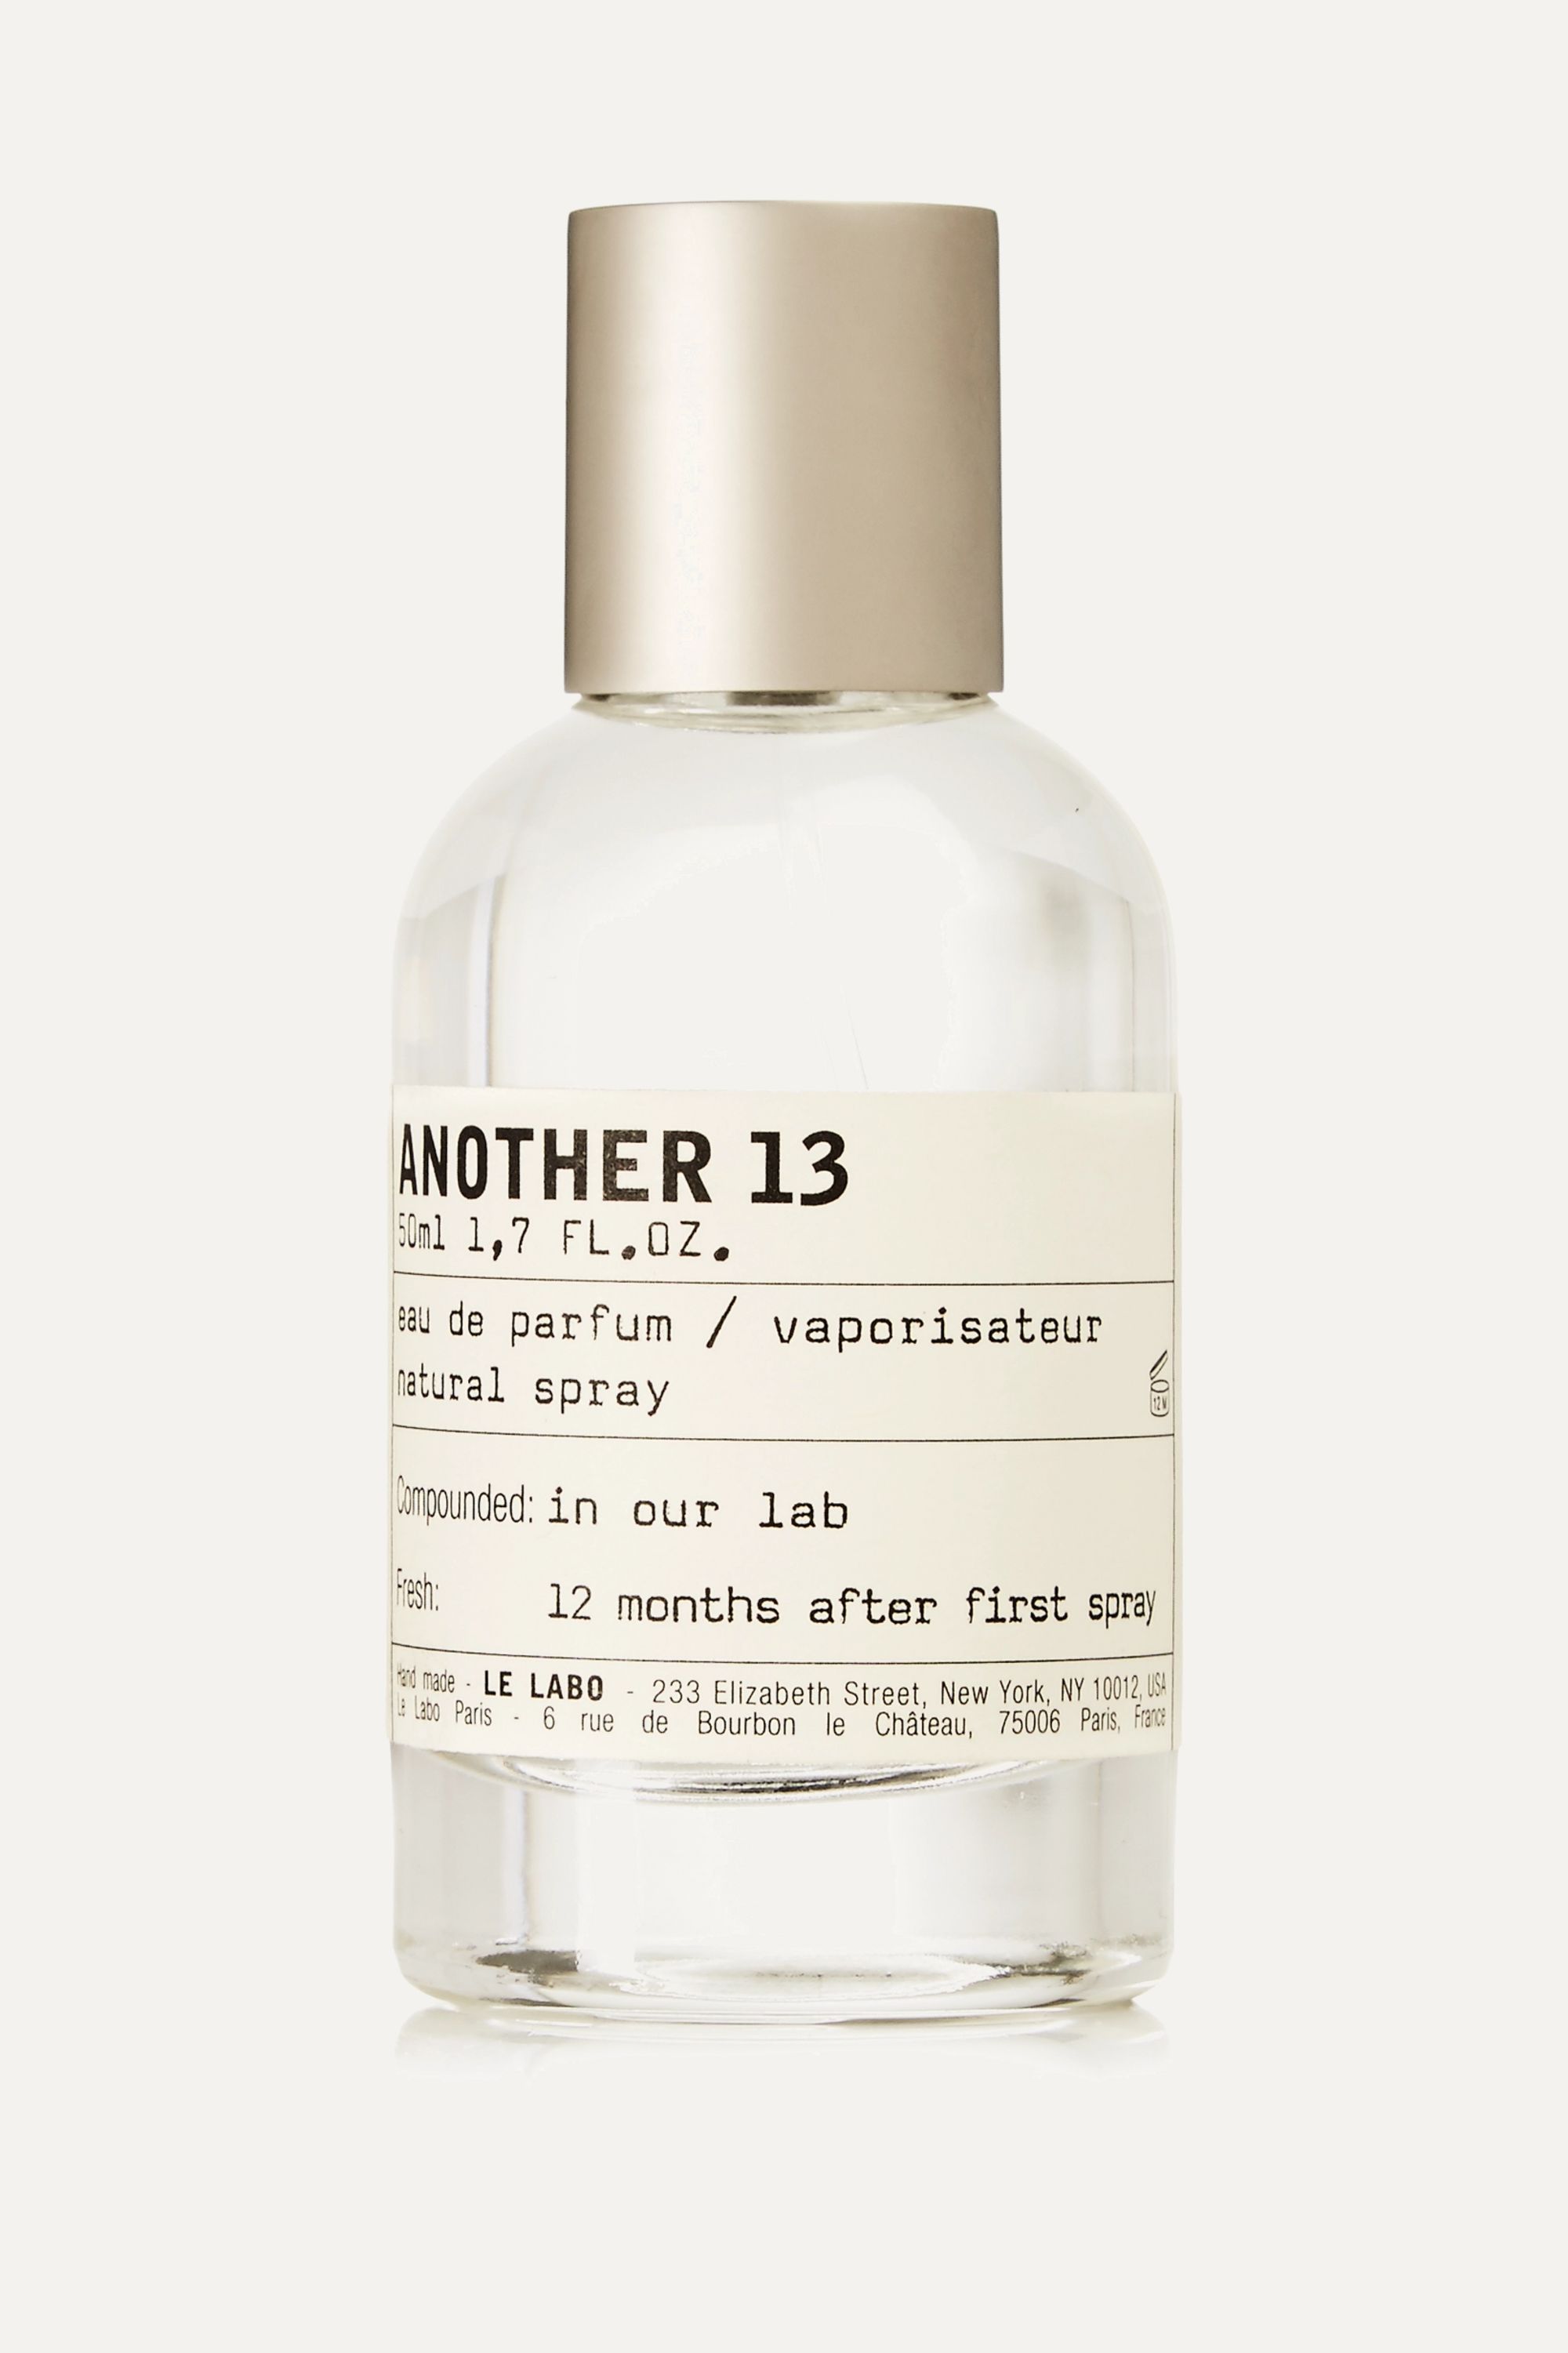 Another 13 отзывы. Духи Ле Лабо 13. Le Labo парфюмерная вода another 13. Le Labo another 13 100 ml. Духи Santal another 13.